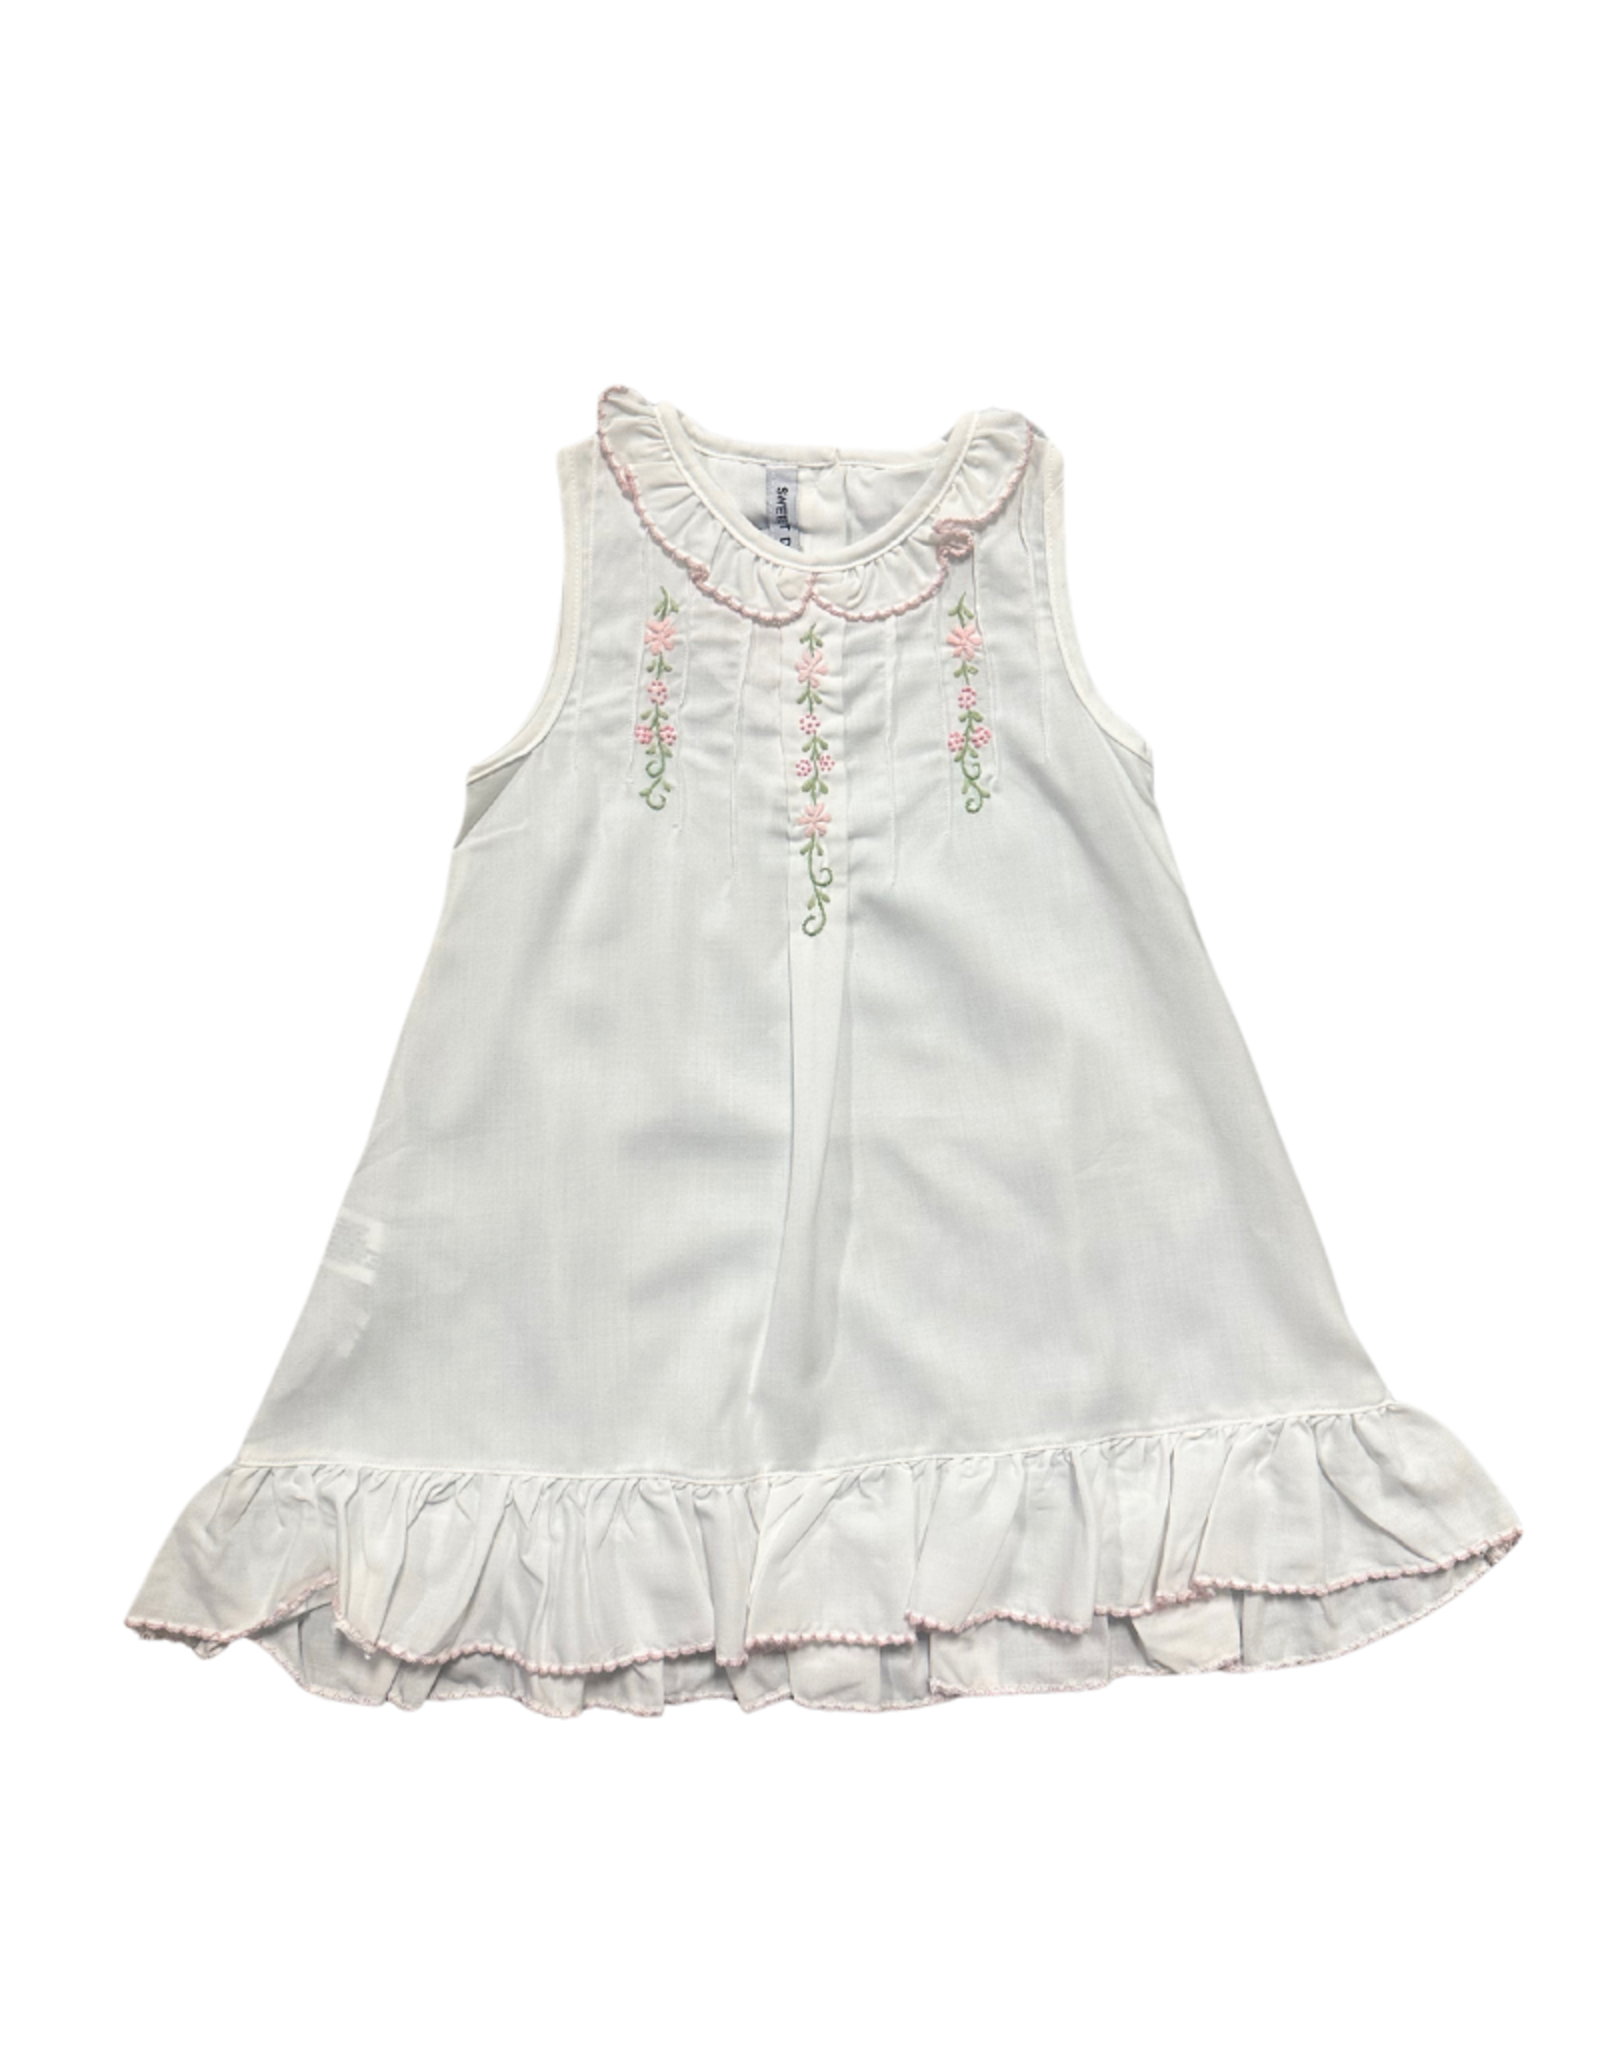 Sweet Dreams White Gown W/ Embroidered Flower Vine